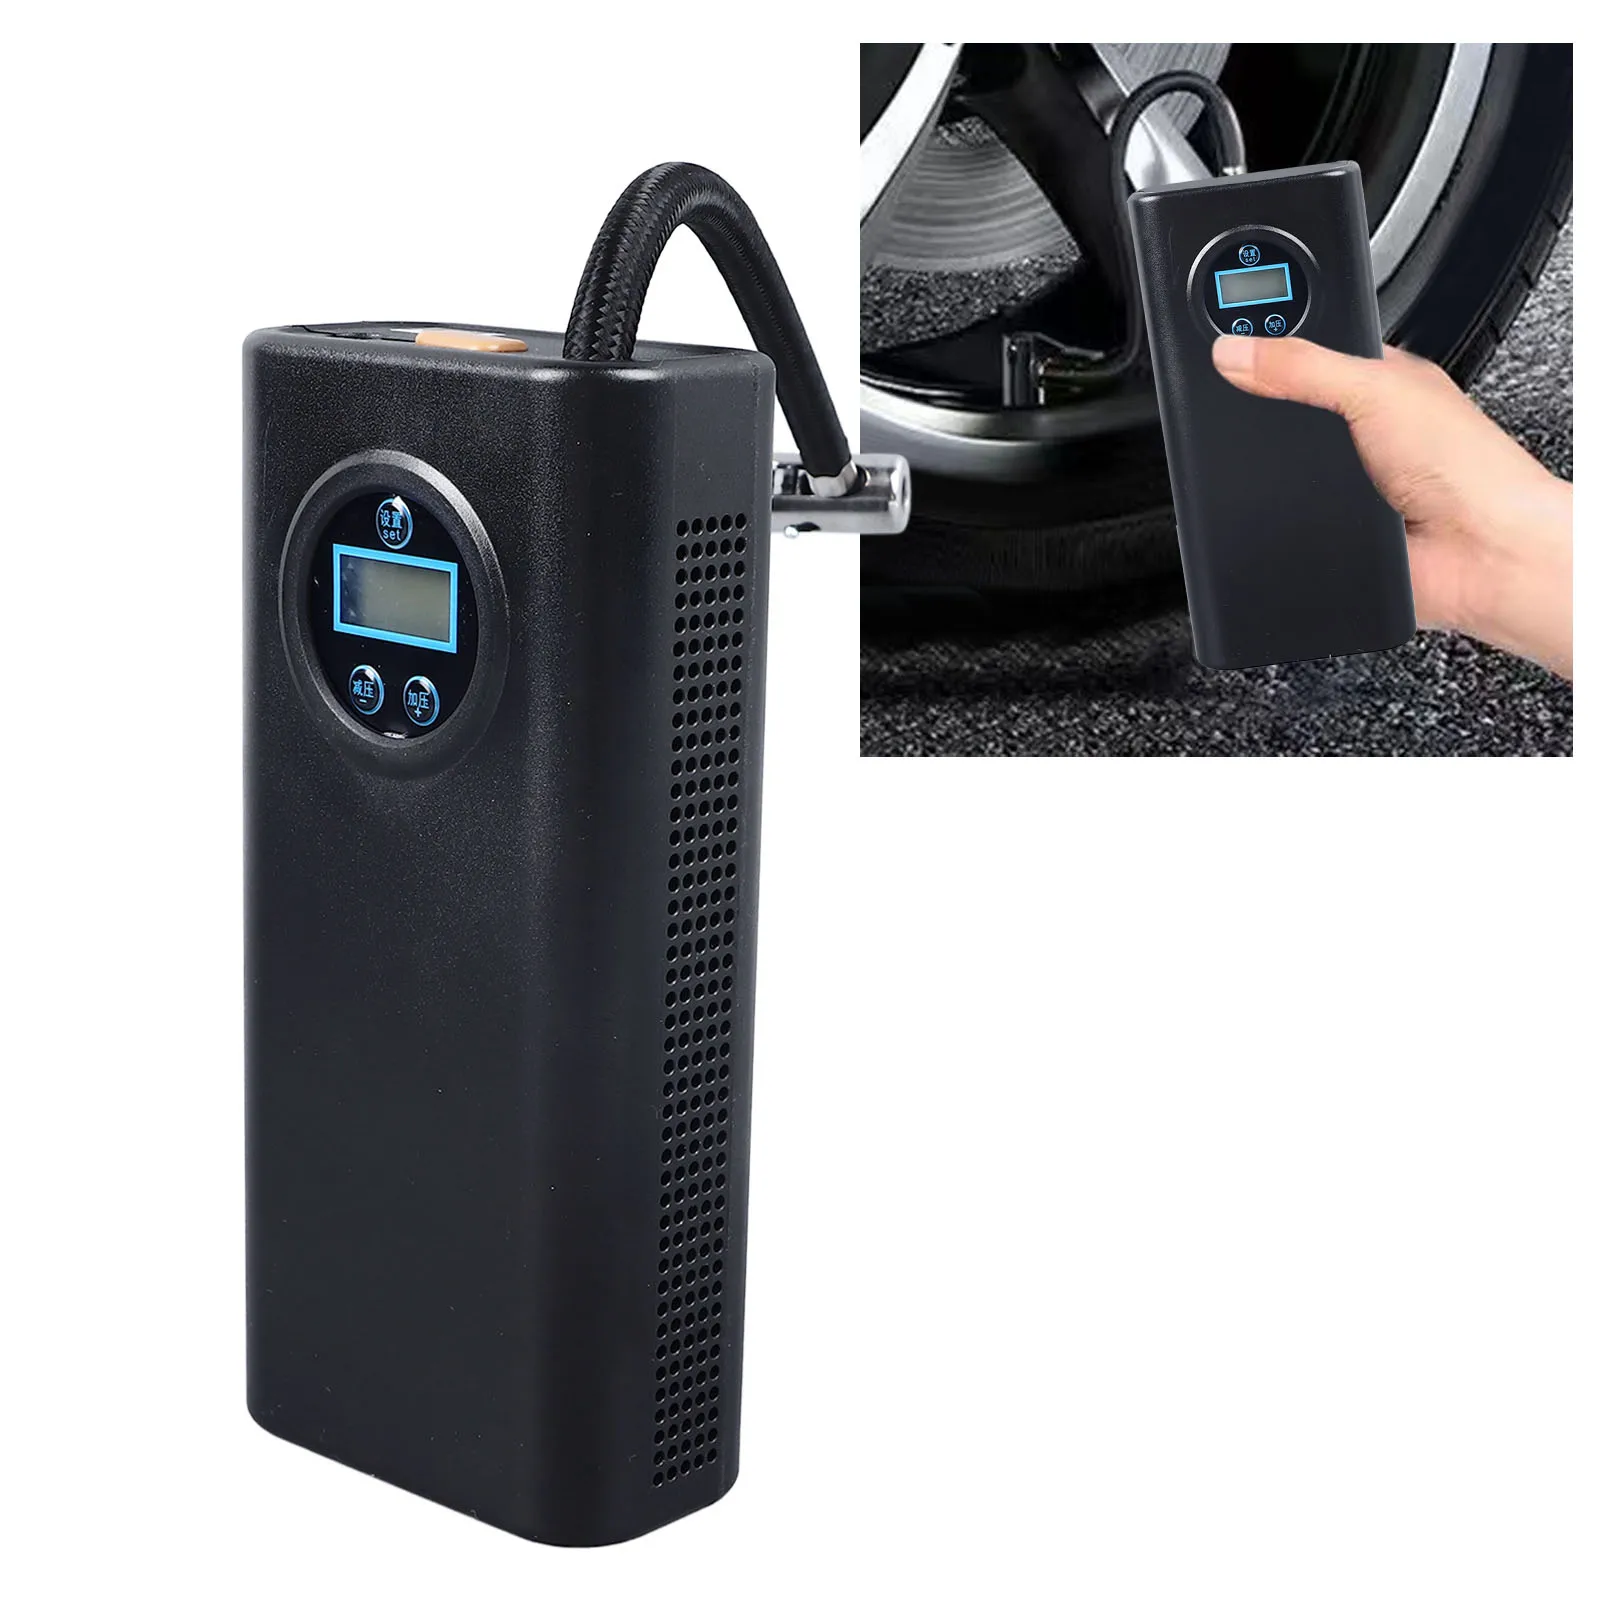 

Car Cordless Air Pump Portable Electric Tire Inflator Pump Automatic High Pressure Flushing For Power Banks Bicycles